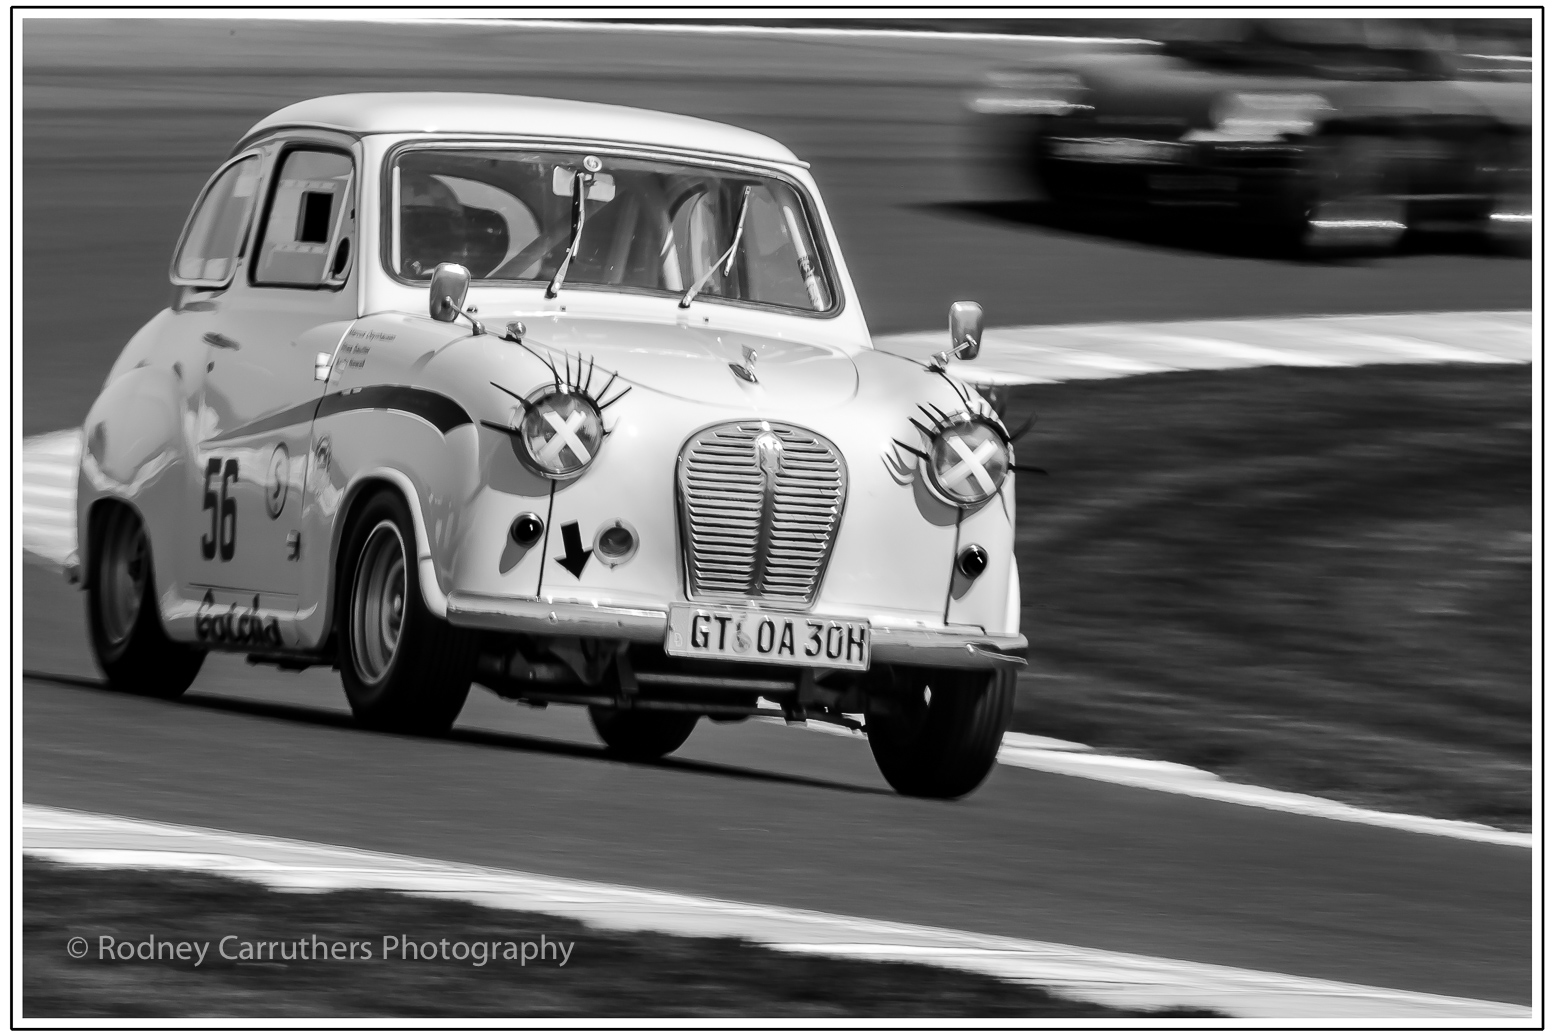 17th March 2017 - Historic Racing Phillip Island - My first serious car in 1959 was an Austin A30